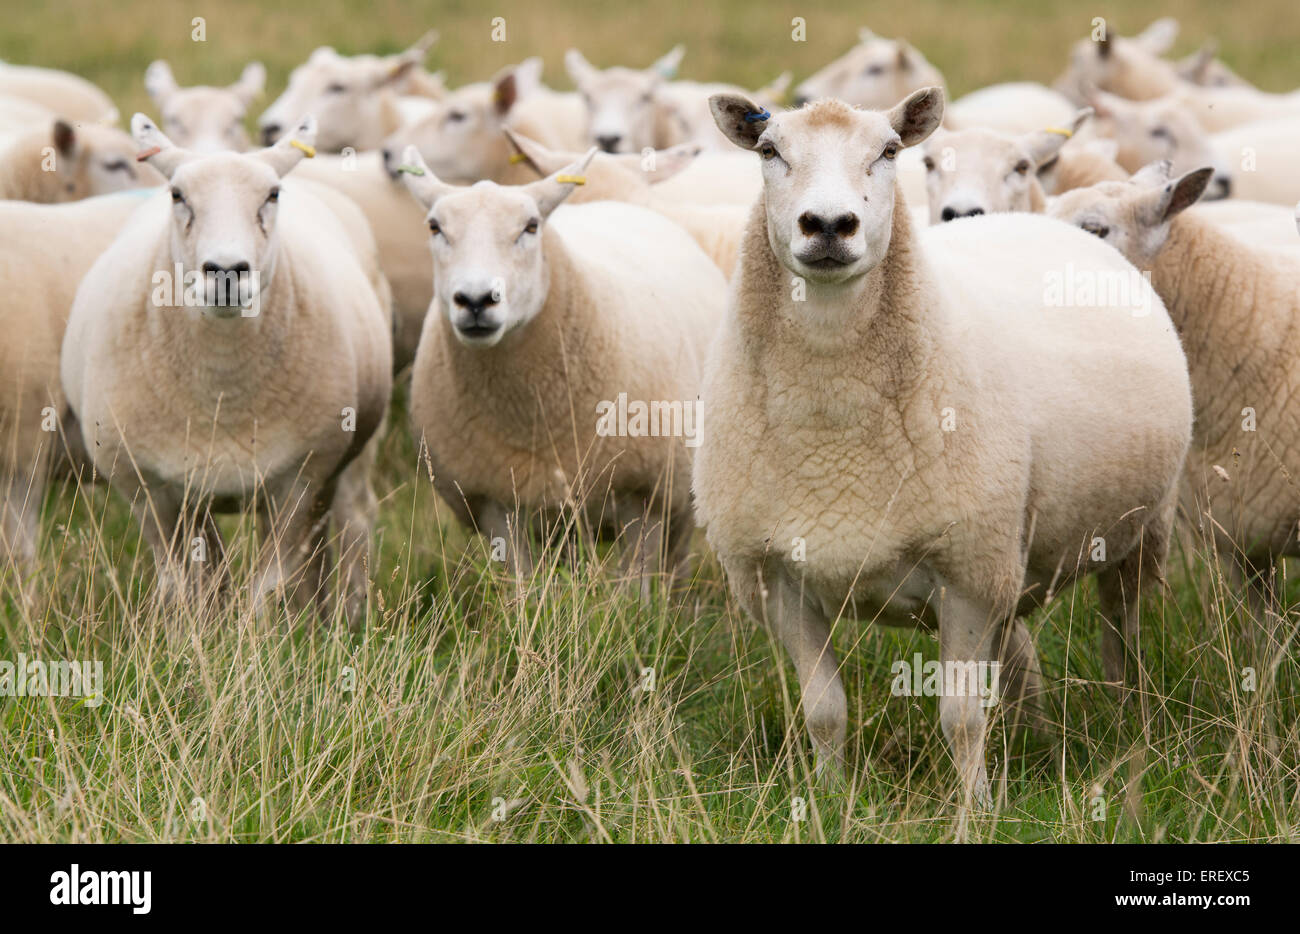 Lleyn Sheep In A Pen At An Agriculturl Show Stock Photo, 44% OFF